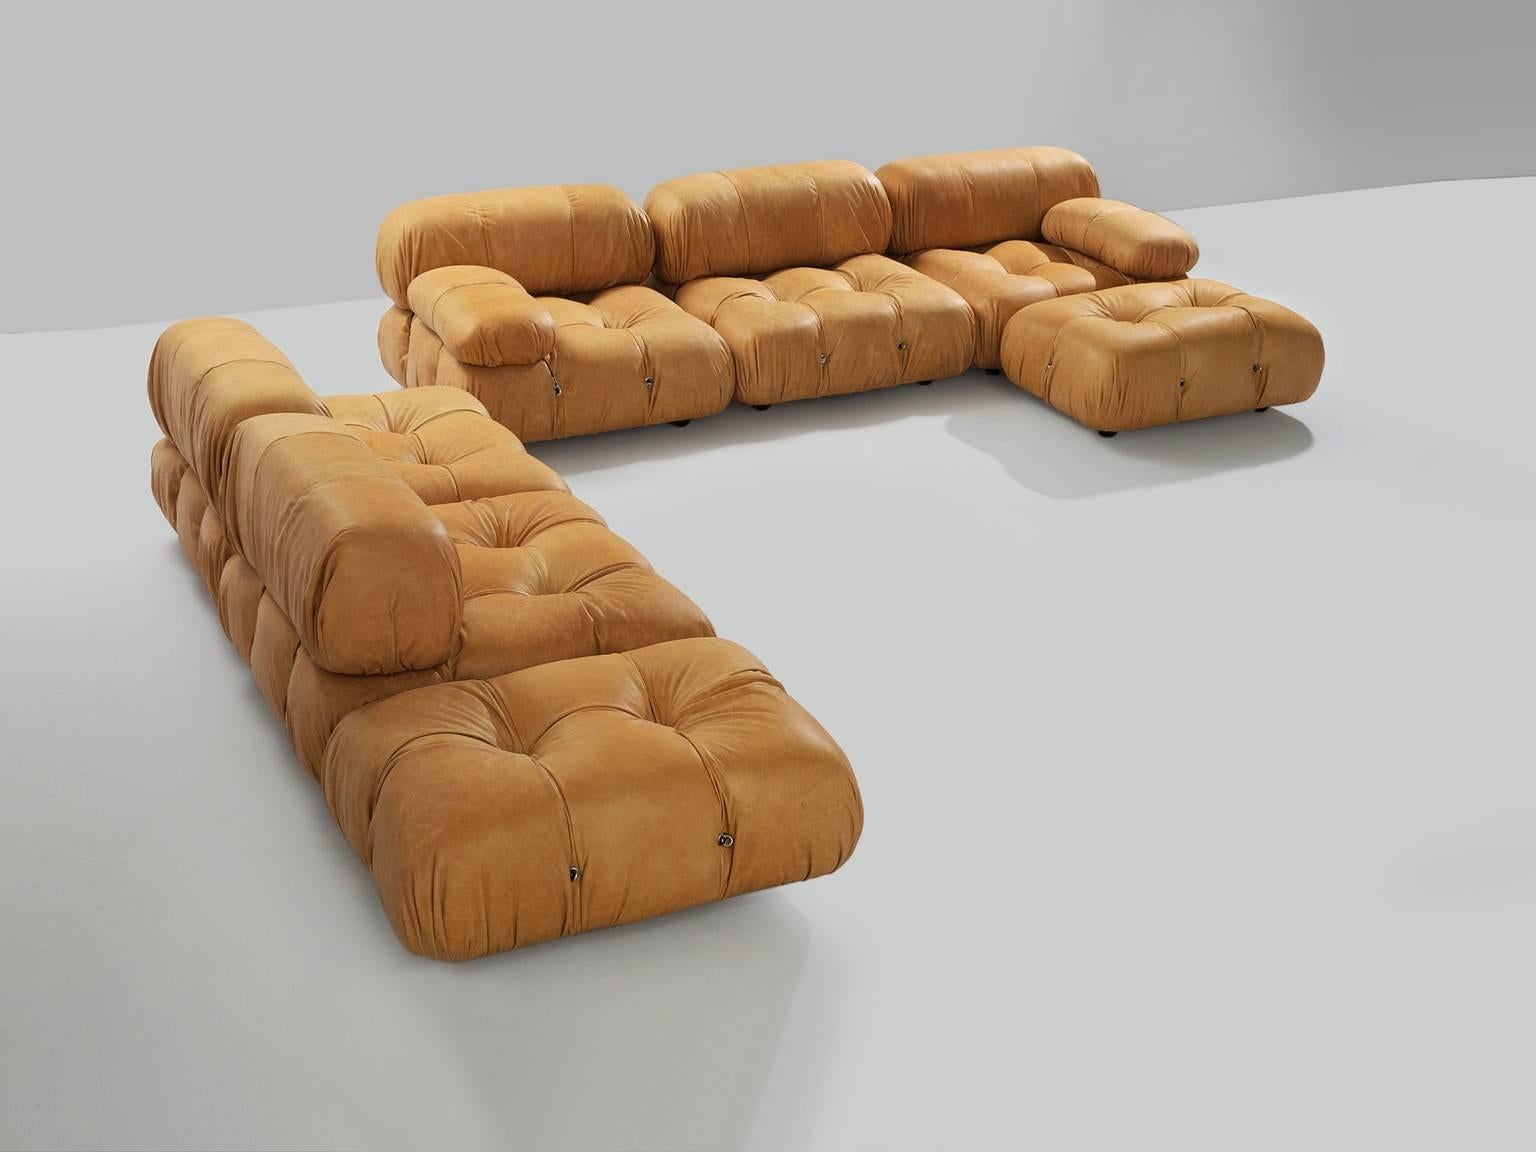 Large modular 'Cameleonda' sofa, in cognac leather upholstery by Mario Bellini for B&B Italia, Italy 1972.

The sectional elements this sofa was made with, can be used freely and apart from one another. The backs and armrests are provided with